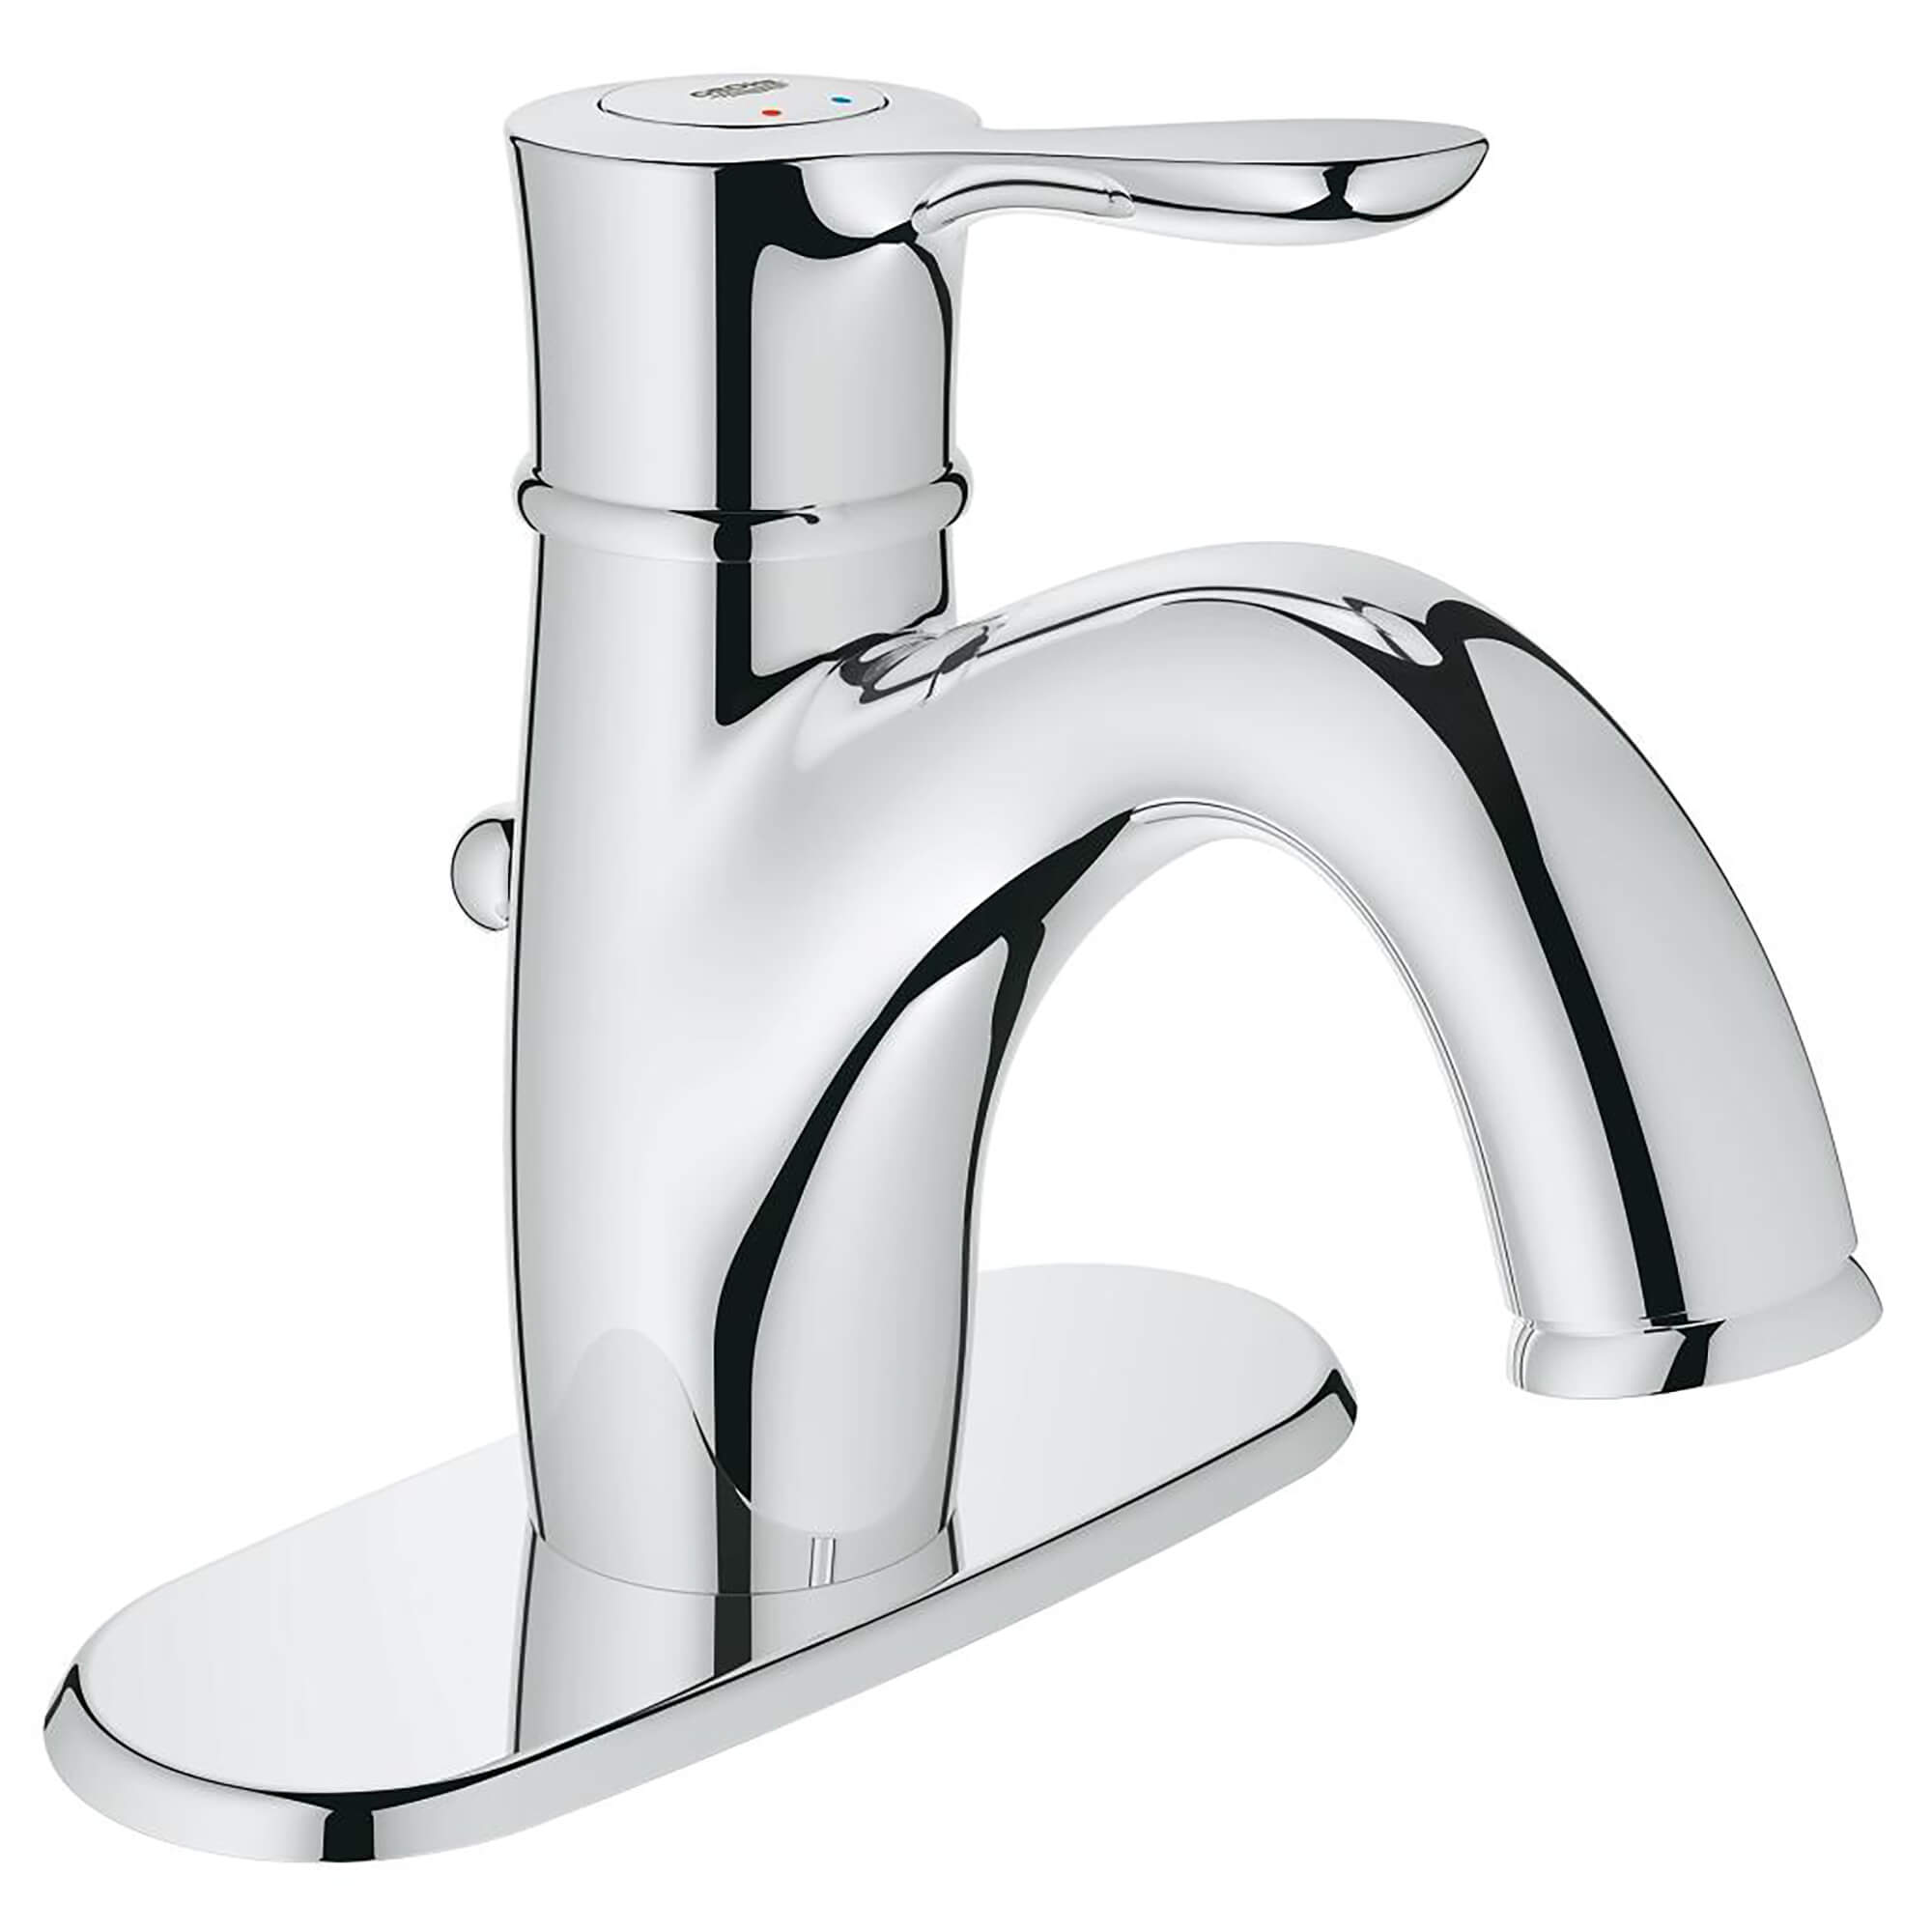 Centerset Single Handle Single Hole Bathroom Faucet With Escutcheon   12 GPM GROHE BRUSHED NICKEL